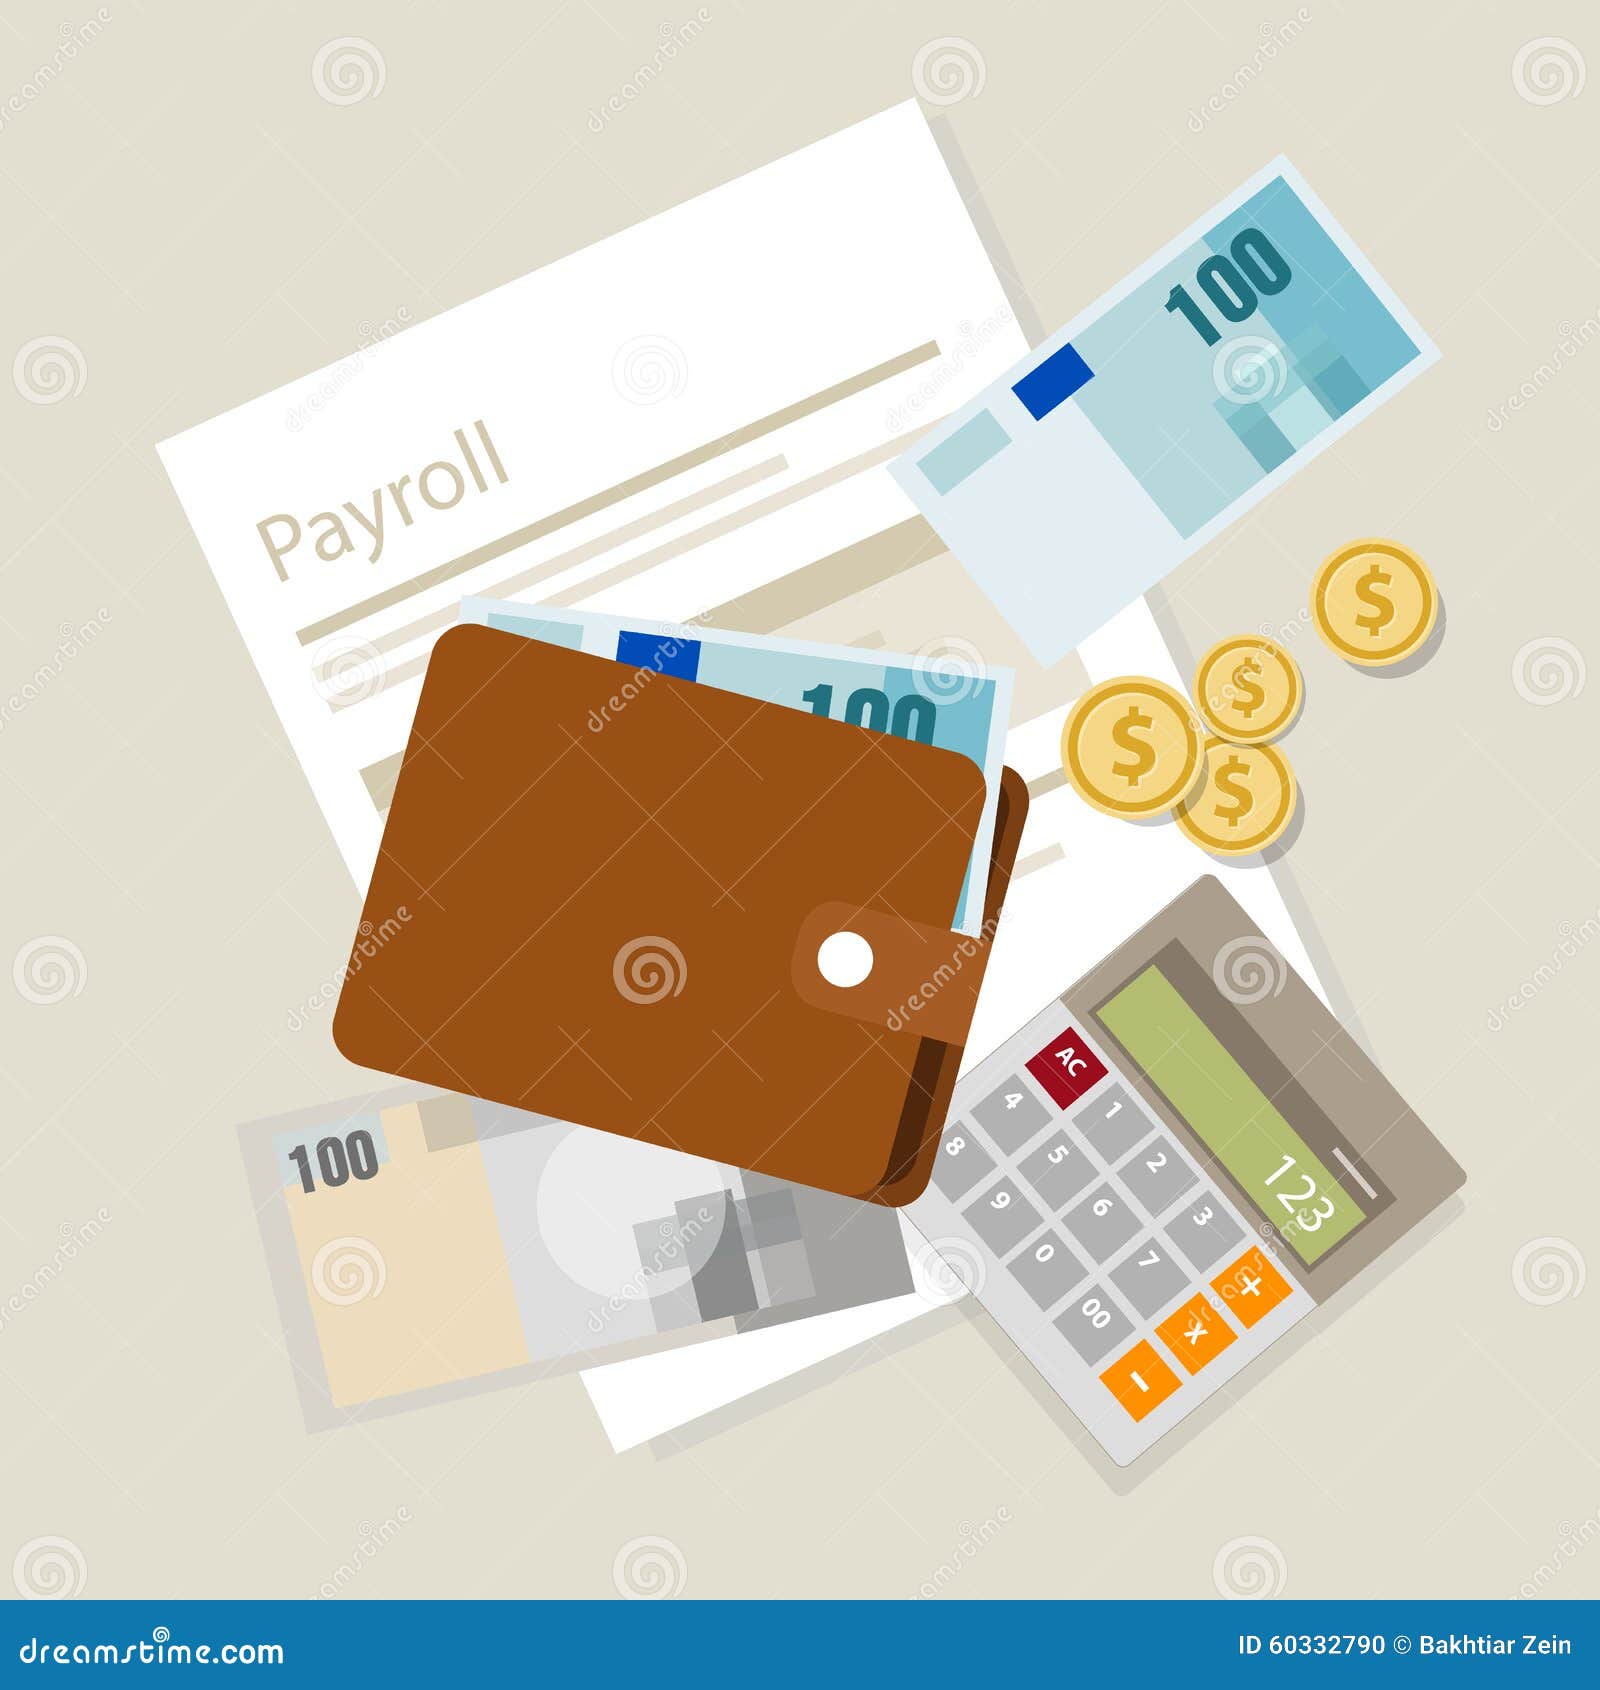 payroll salary accounting payment wages money calculator icon 